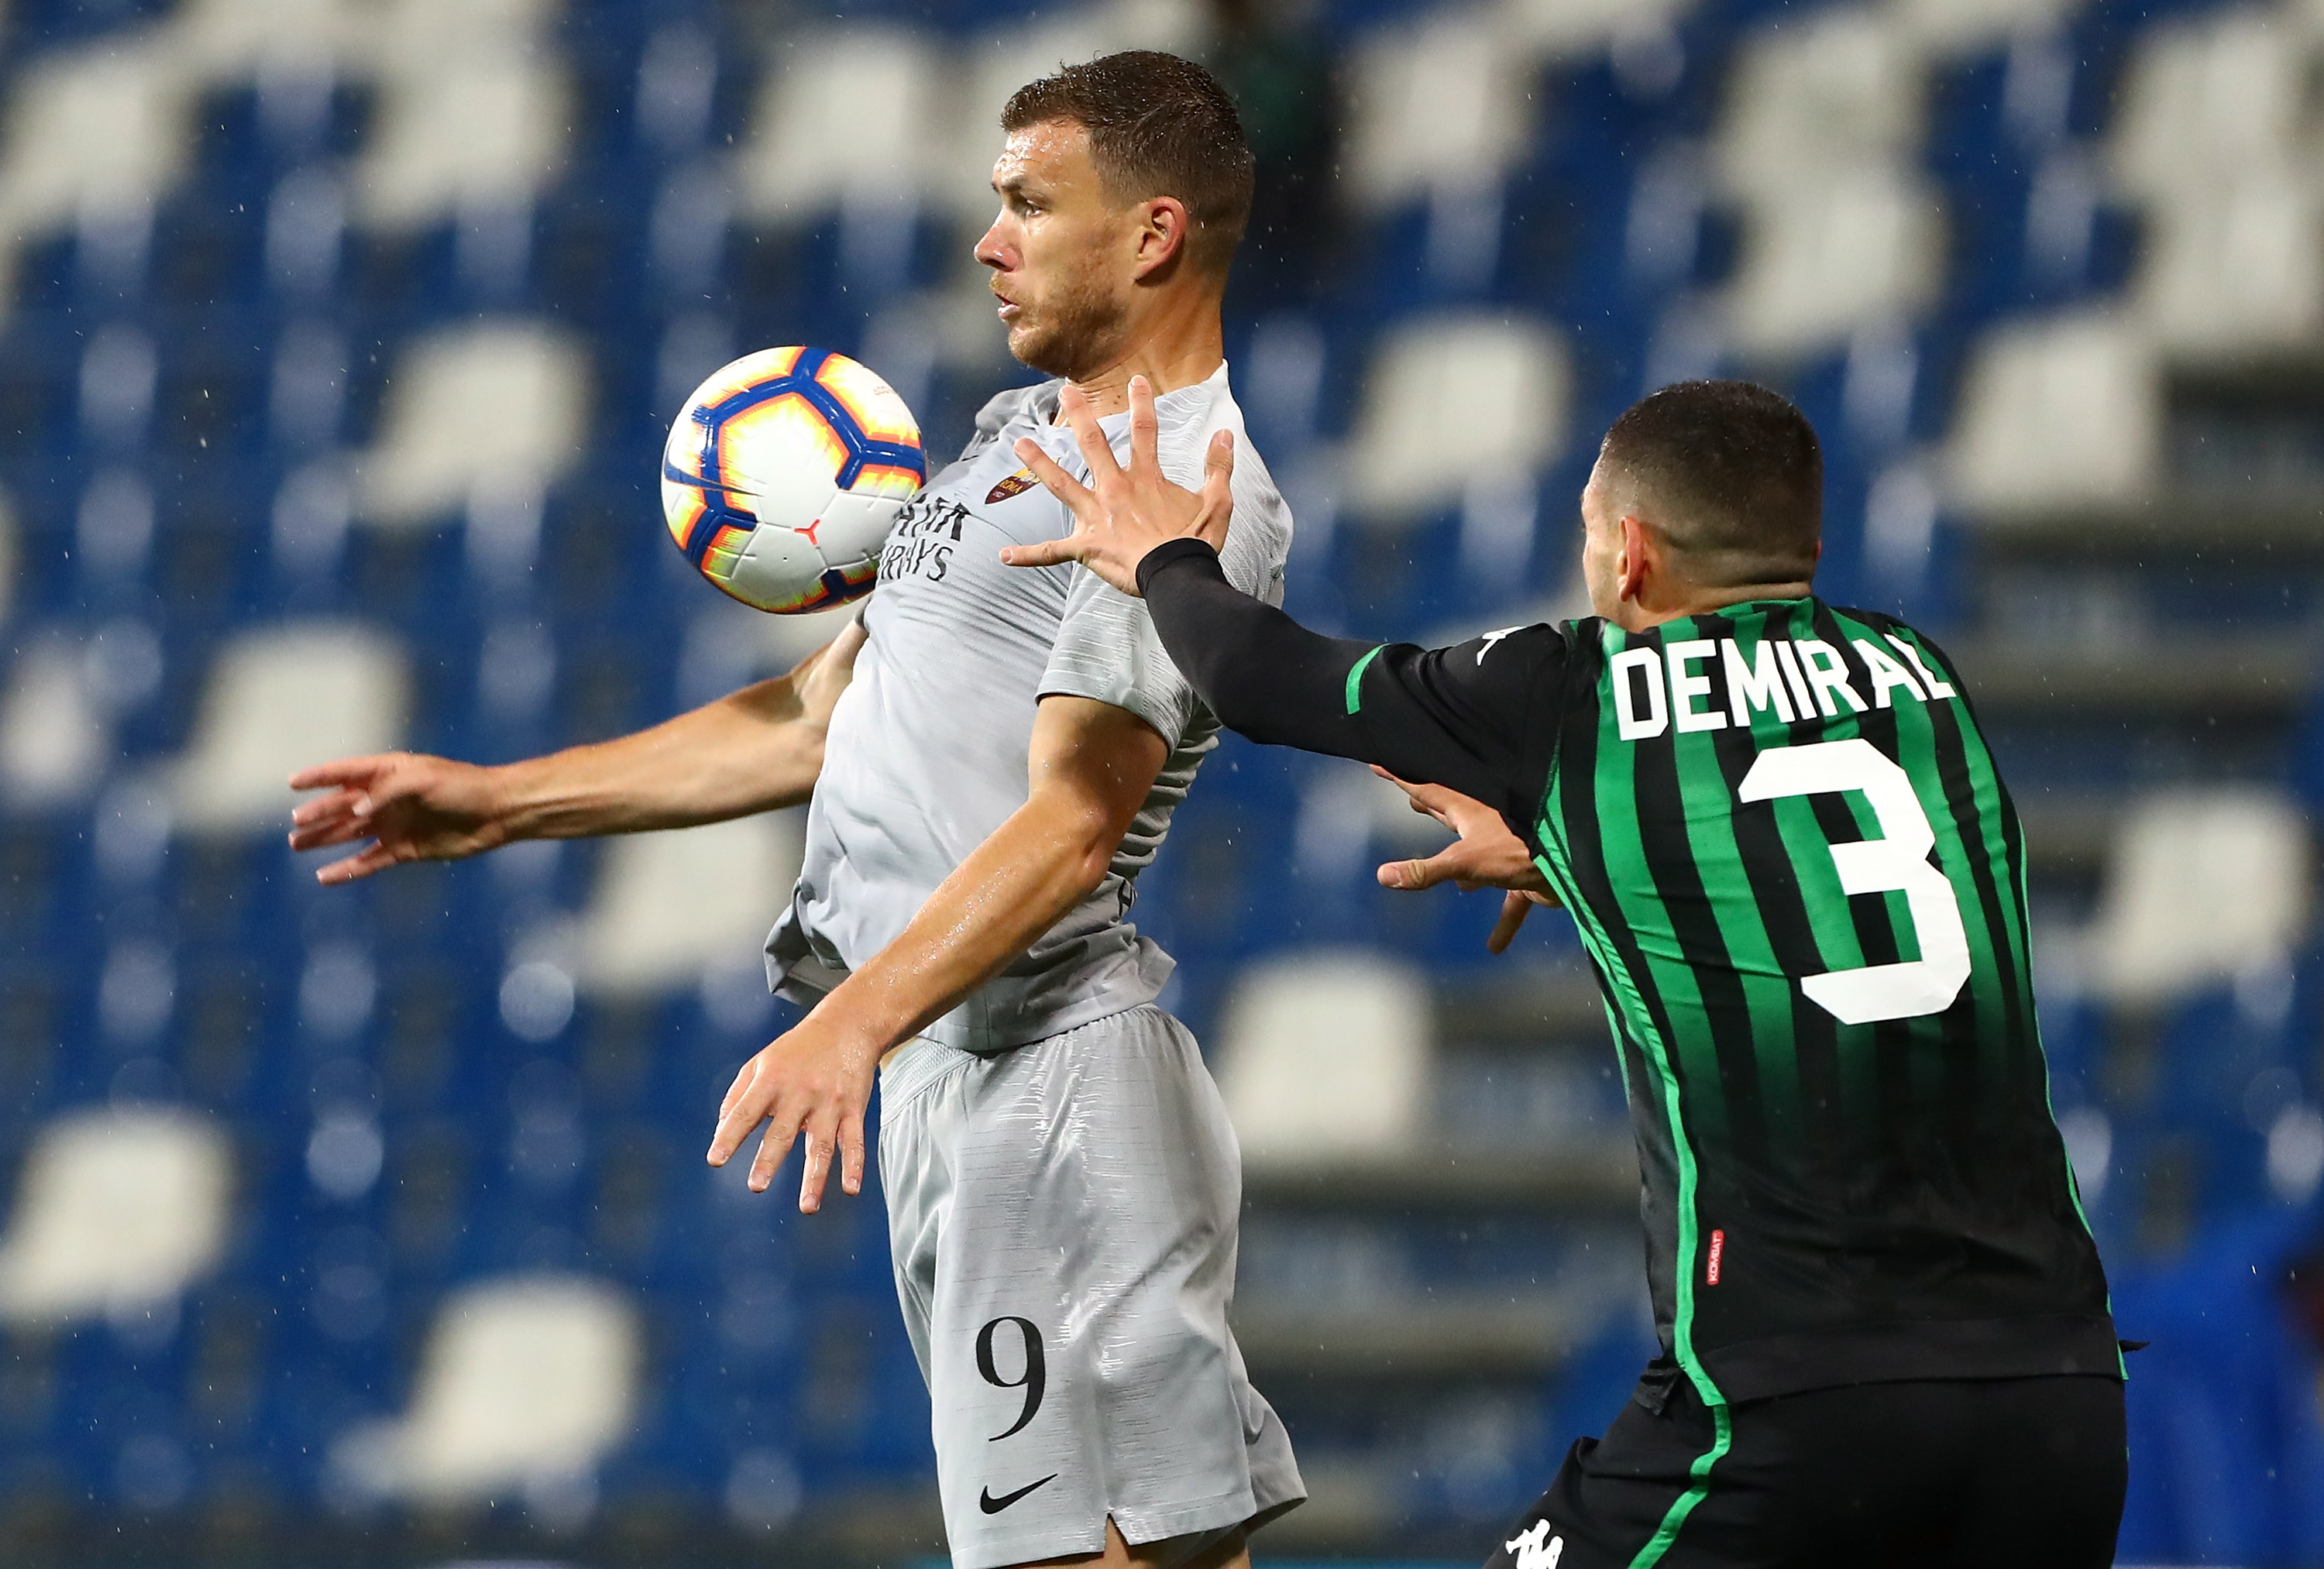 REGGIO NELL'EMILIA, ITALY - MAY 18:  Edin Dzeko of AS Roma competes for the ball with Merih Demiral of US Sassuolo during the Serie A match between US Sassuolo and AS Roma at Mapei Stadium - Citta' del Tricolore on May 18, 2019 in Reggio nell'Emilia, Italy.  (Photo by Marco Luzzani/Getty Images)